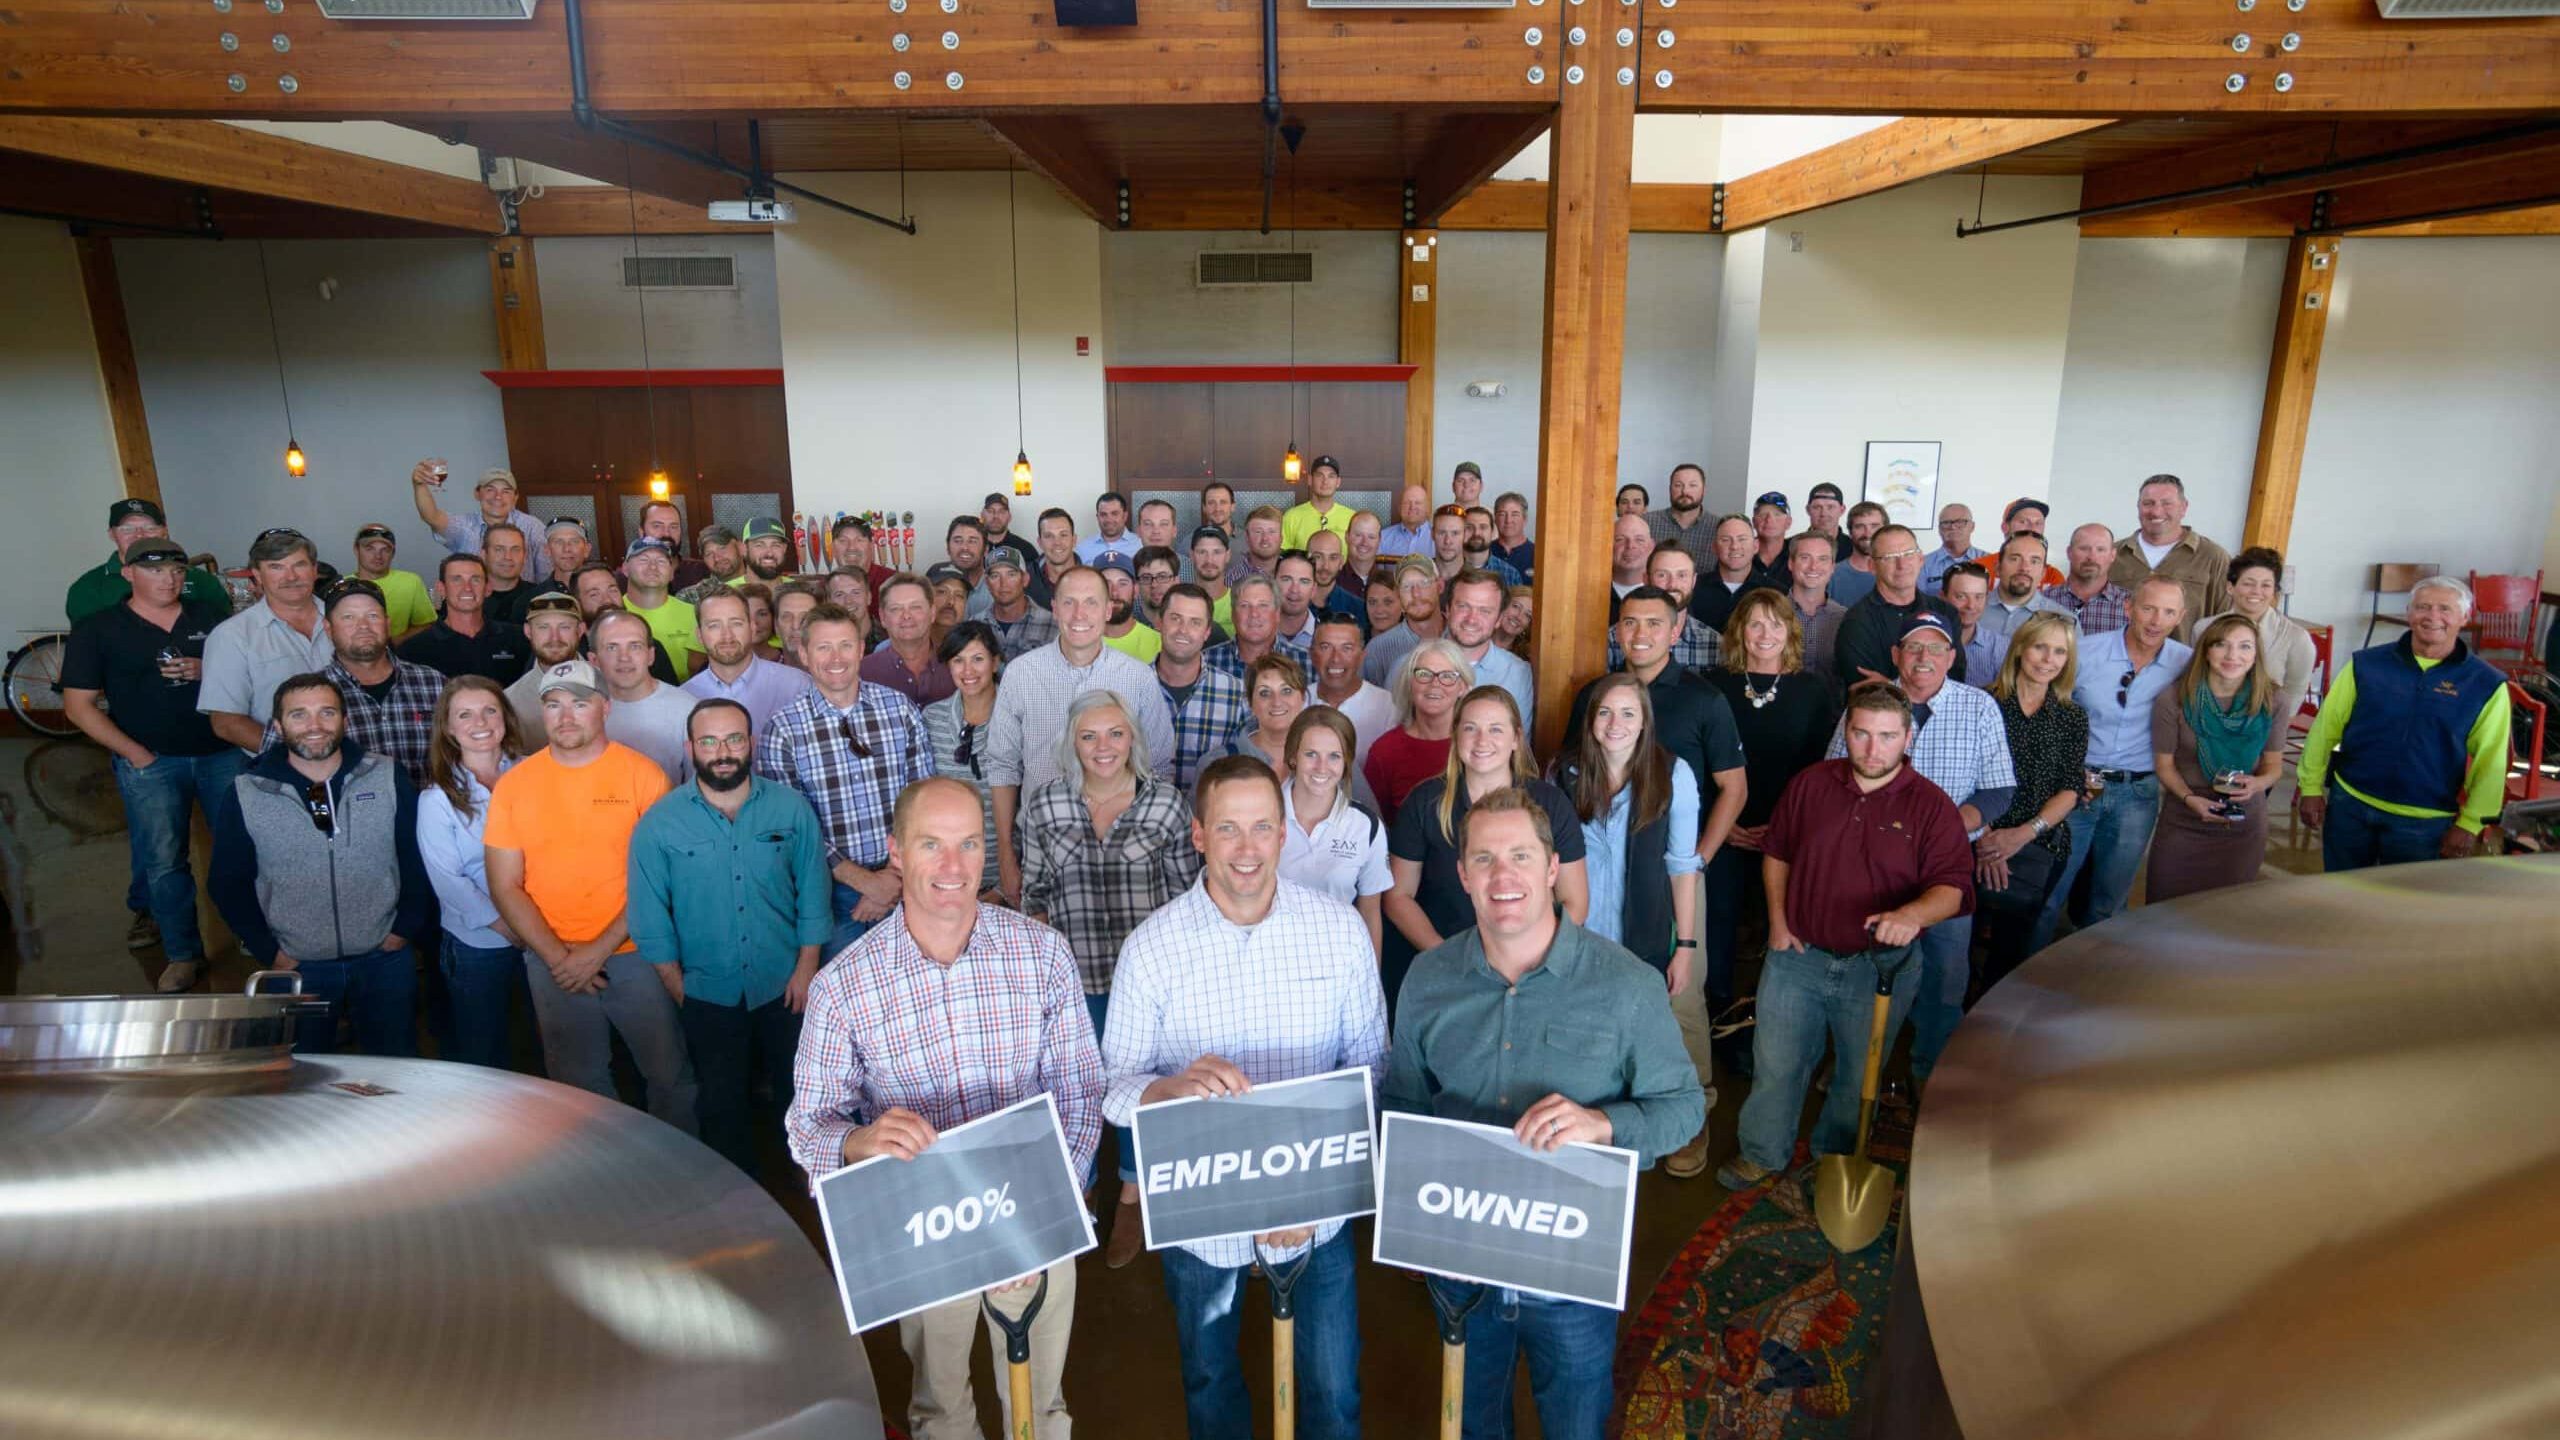 Brinkman Construction | 100% Employee Owned Construction Company | Employee Ownership Month